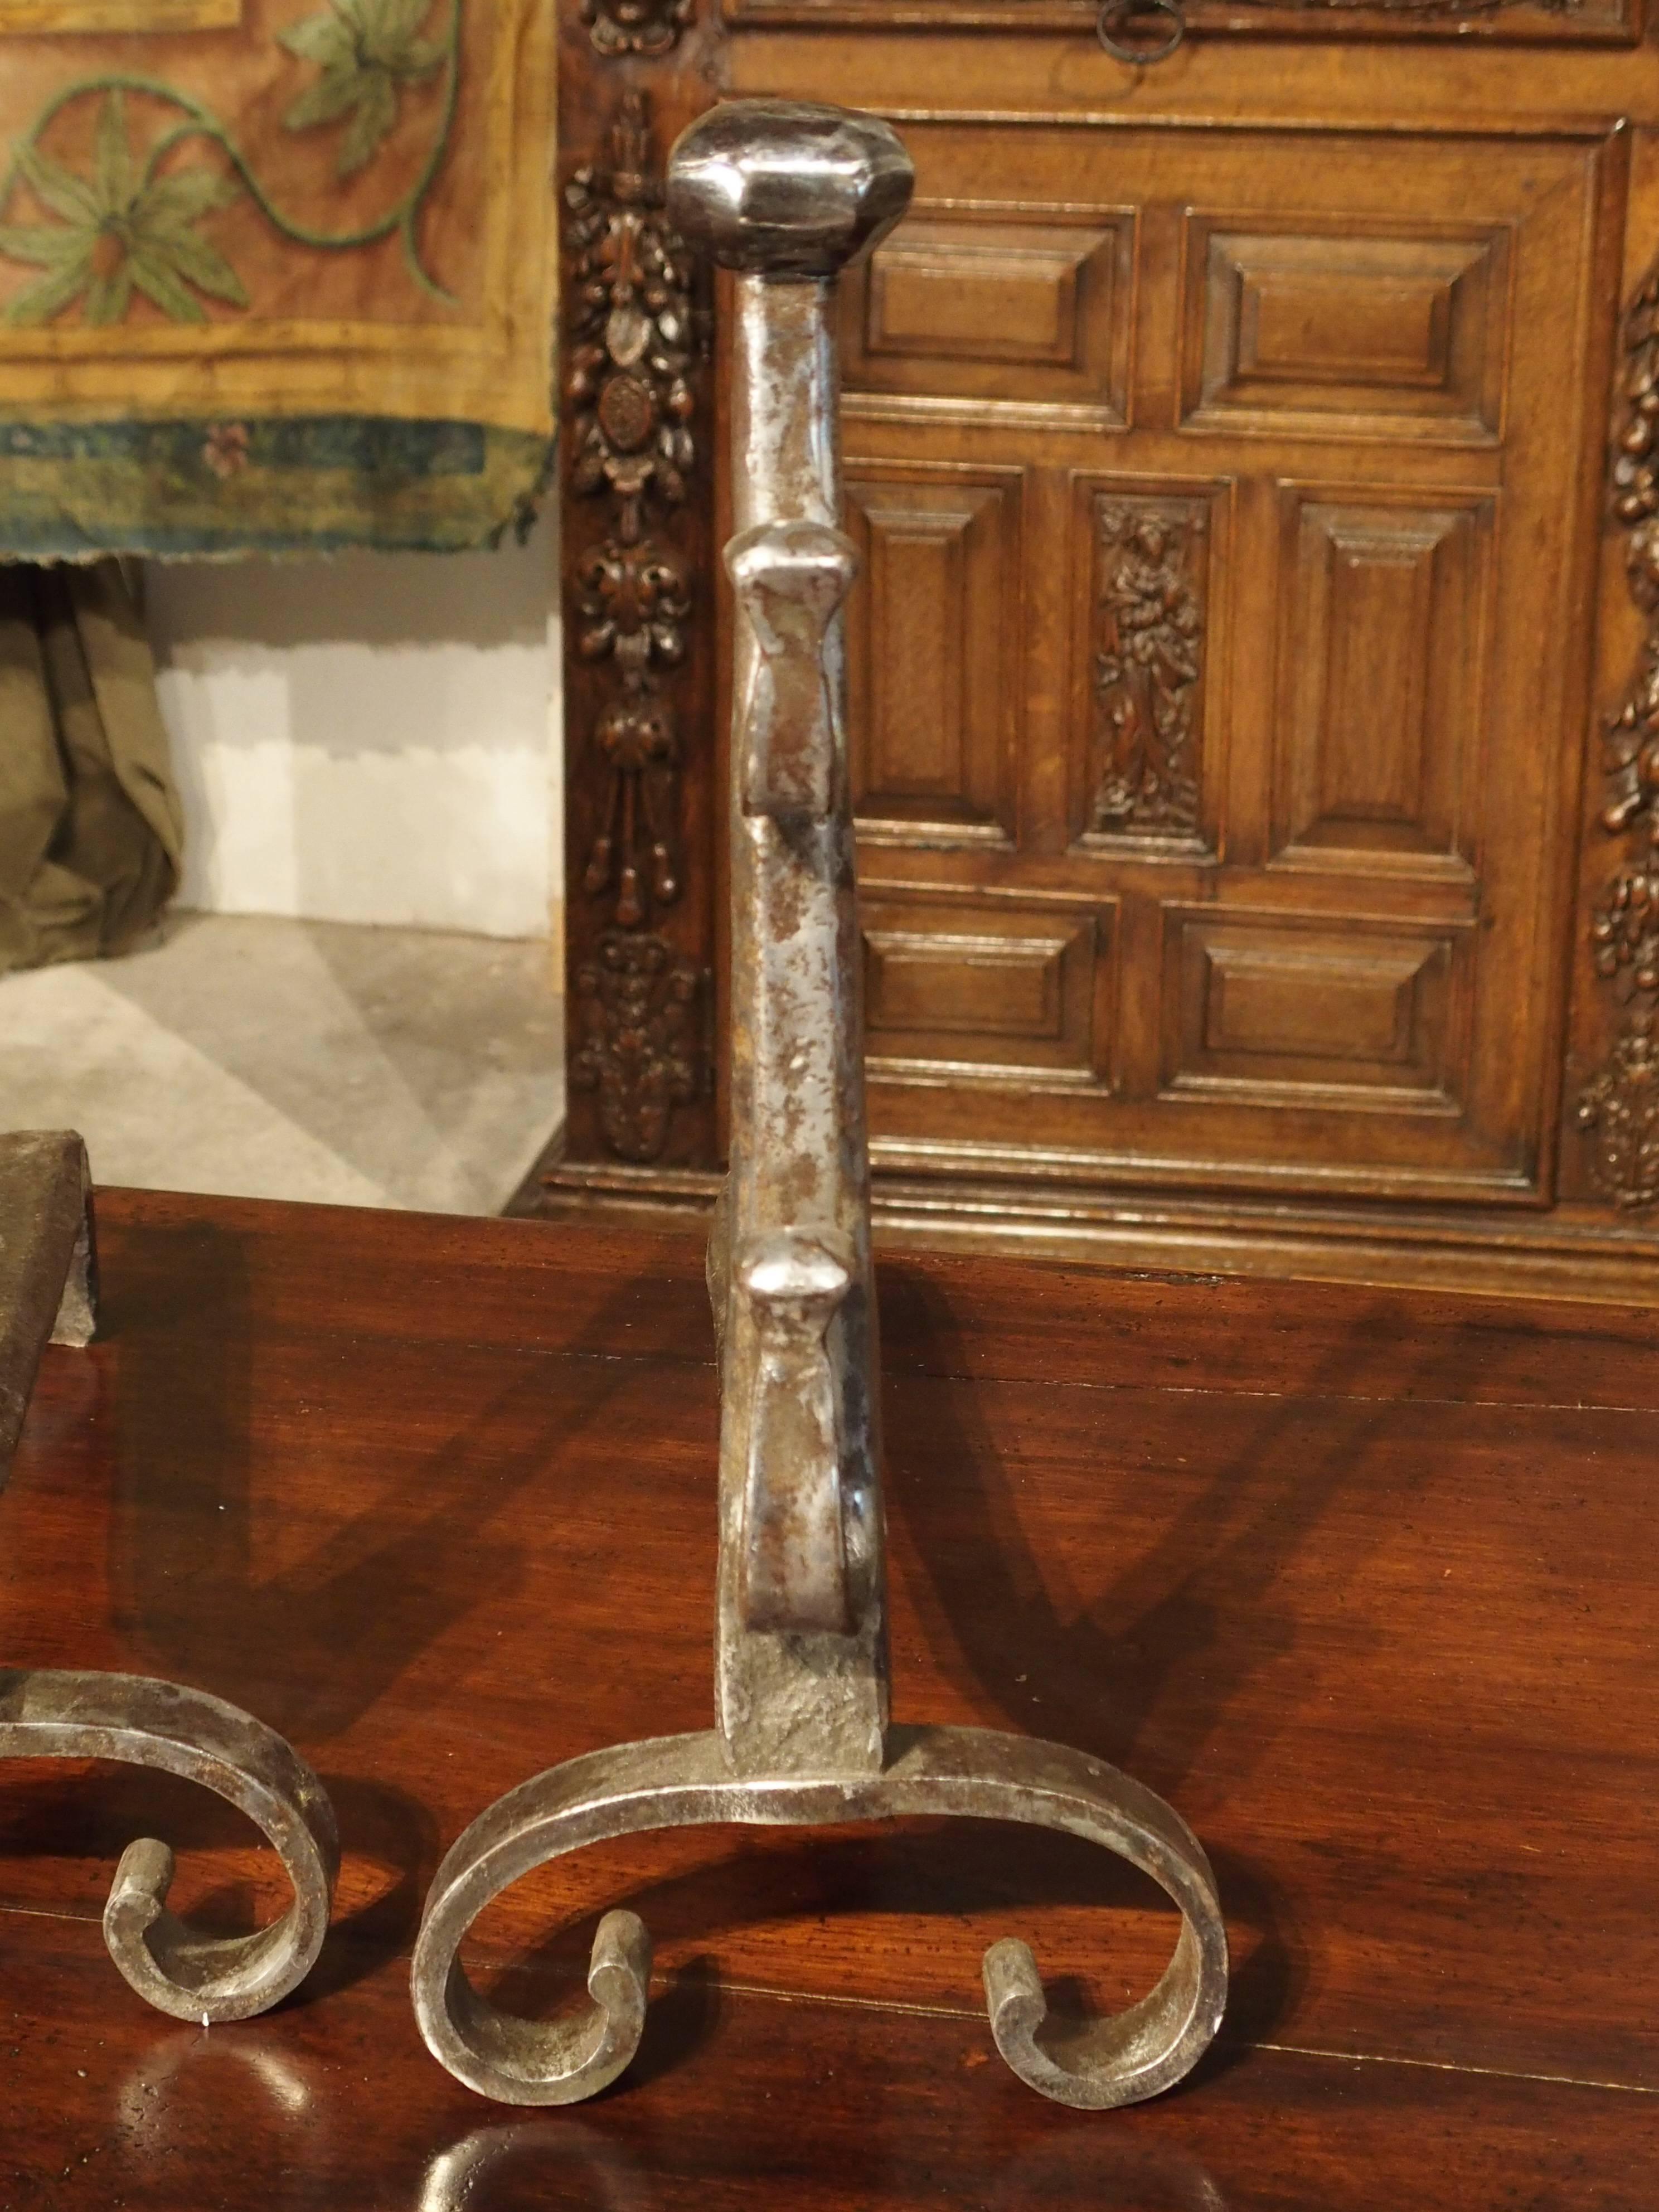 These artistically hand-wrought and hammered, 17th century andirons can be used in any style of design because of their elegantly simplistic design. They have recently been brushed with a wire bristled brush and waxed with a clear paste wax, which